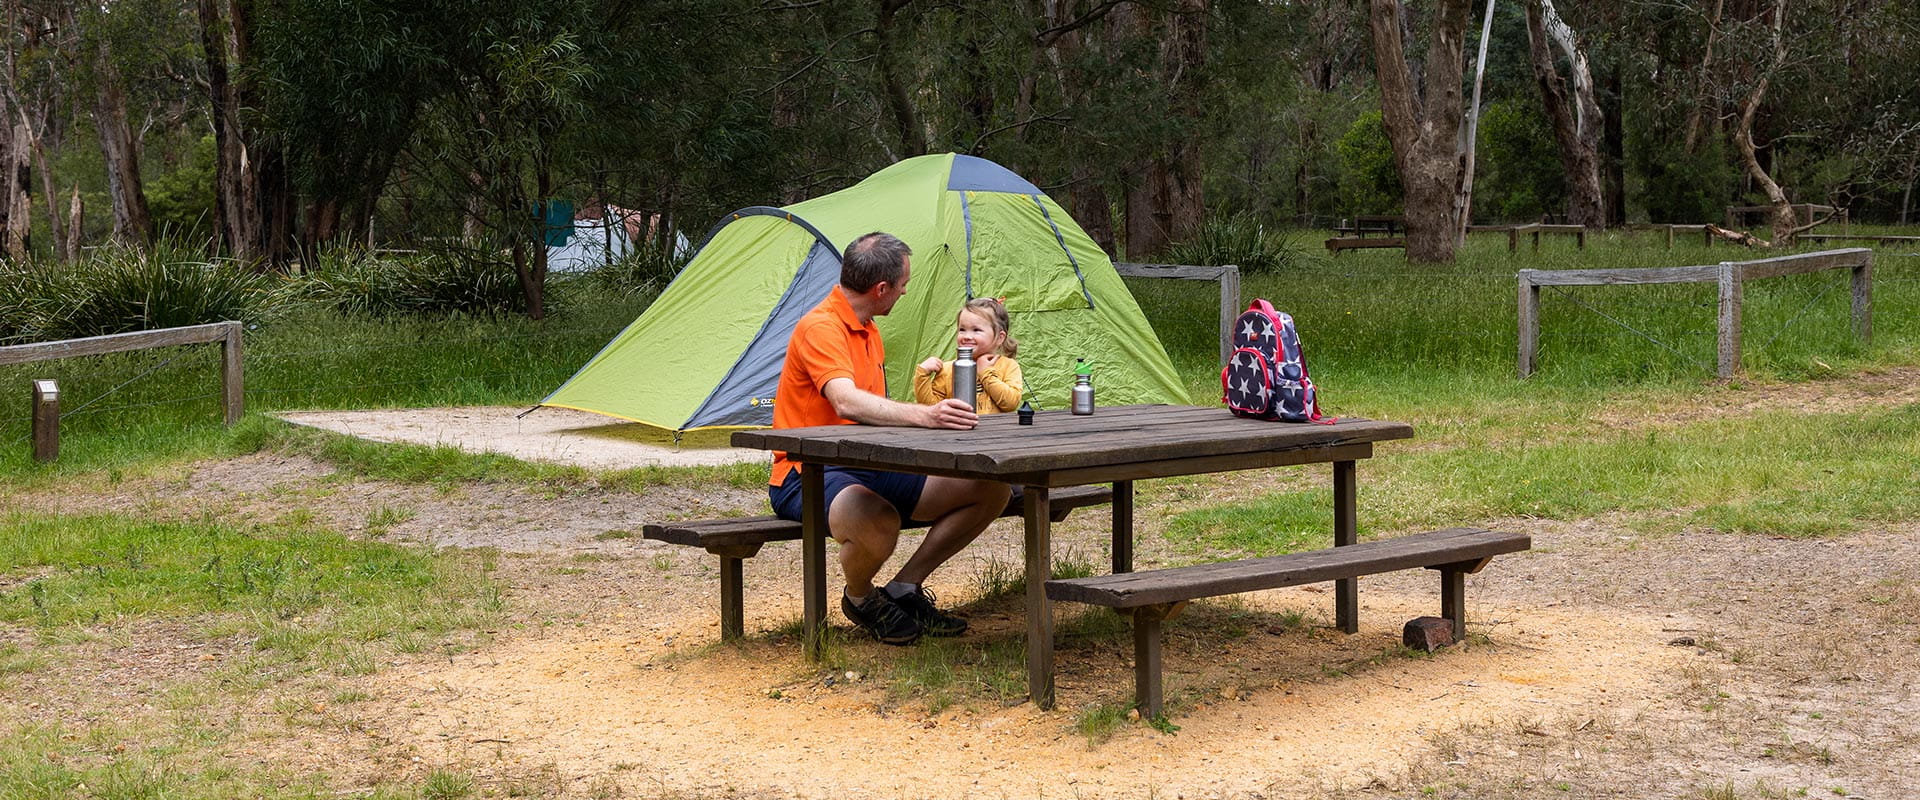 A father and daughter enjoying a drink at a picnic table next to their tent in a grassy campground